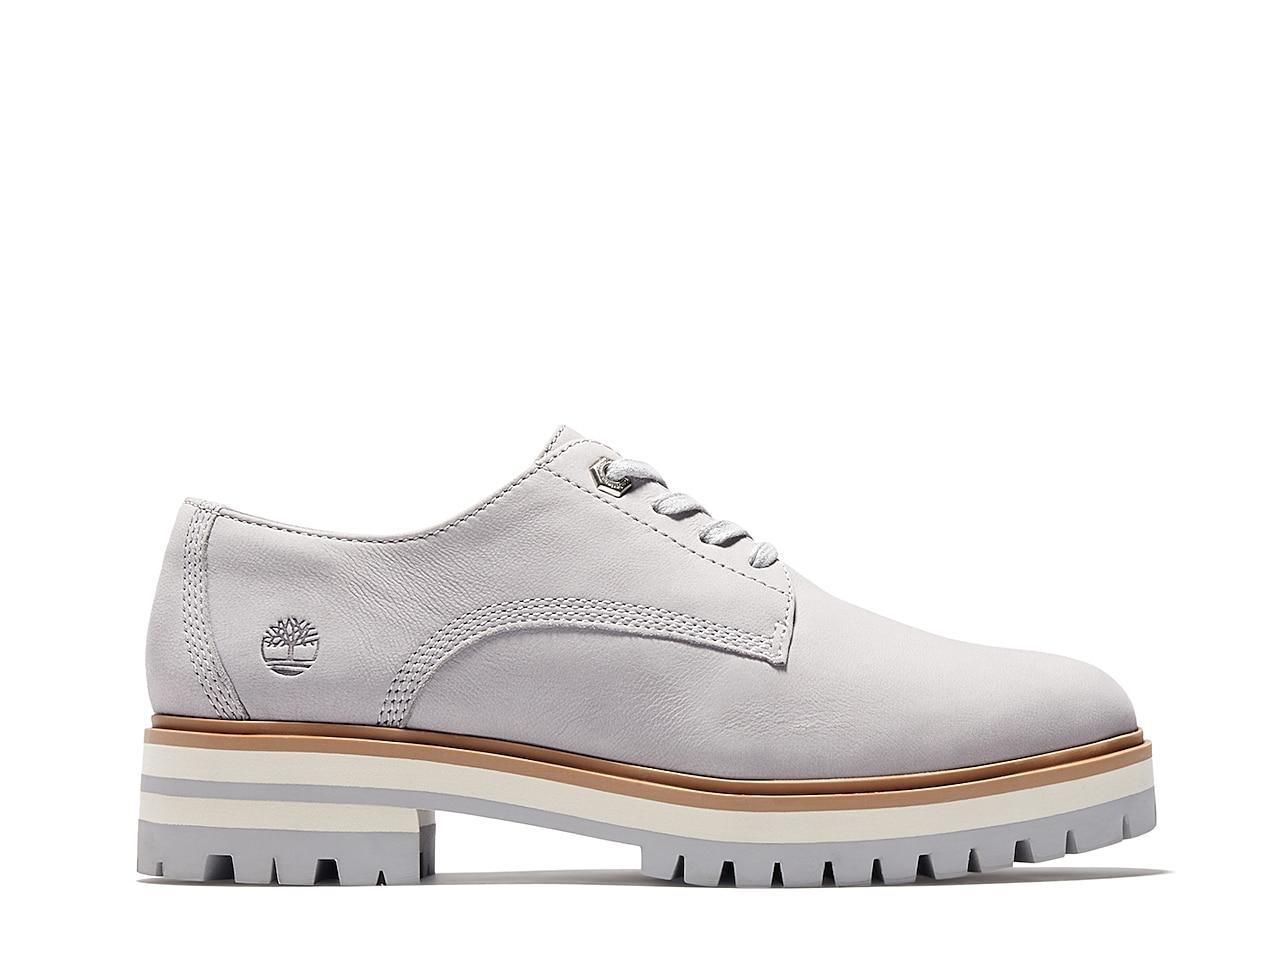 Timberland Leather London Square Derby in Light Grey (Gray) - Lyst